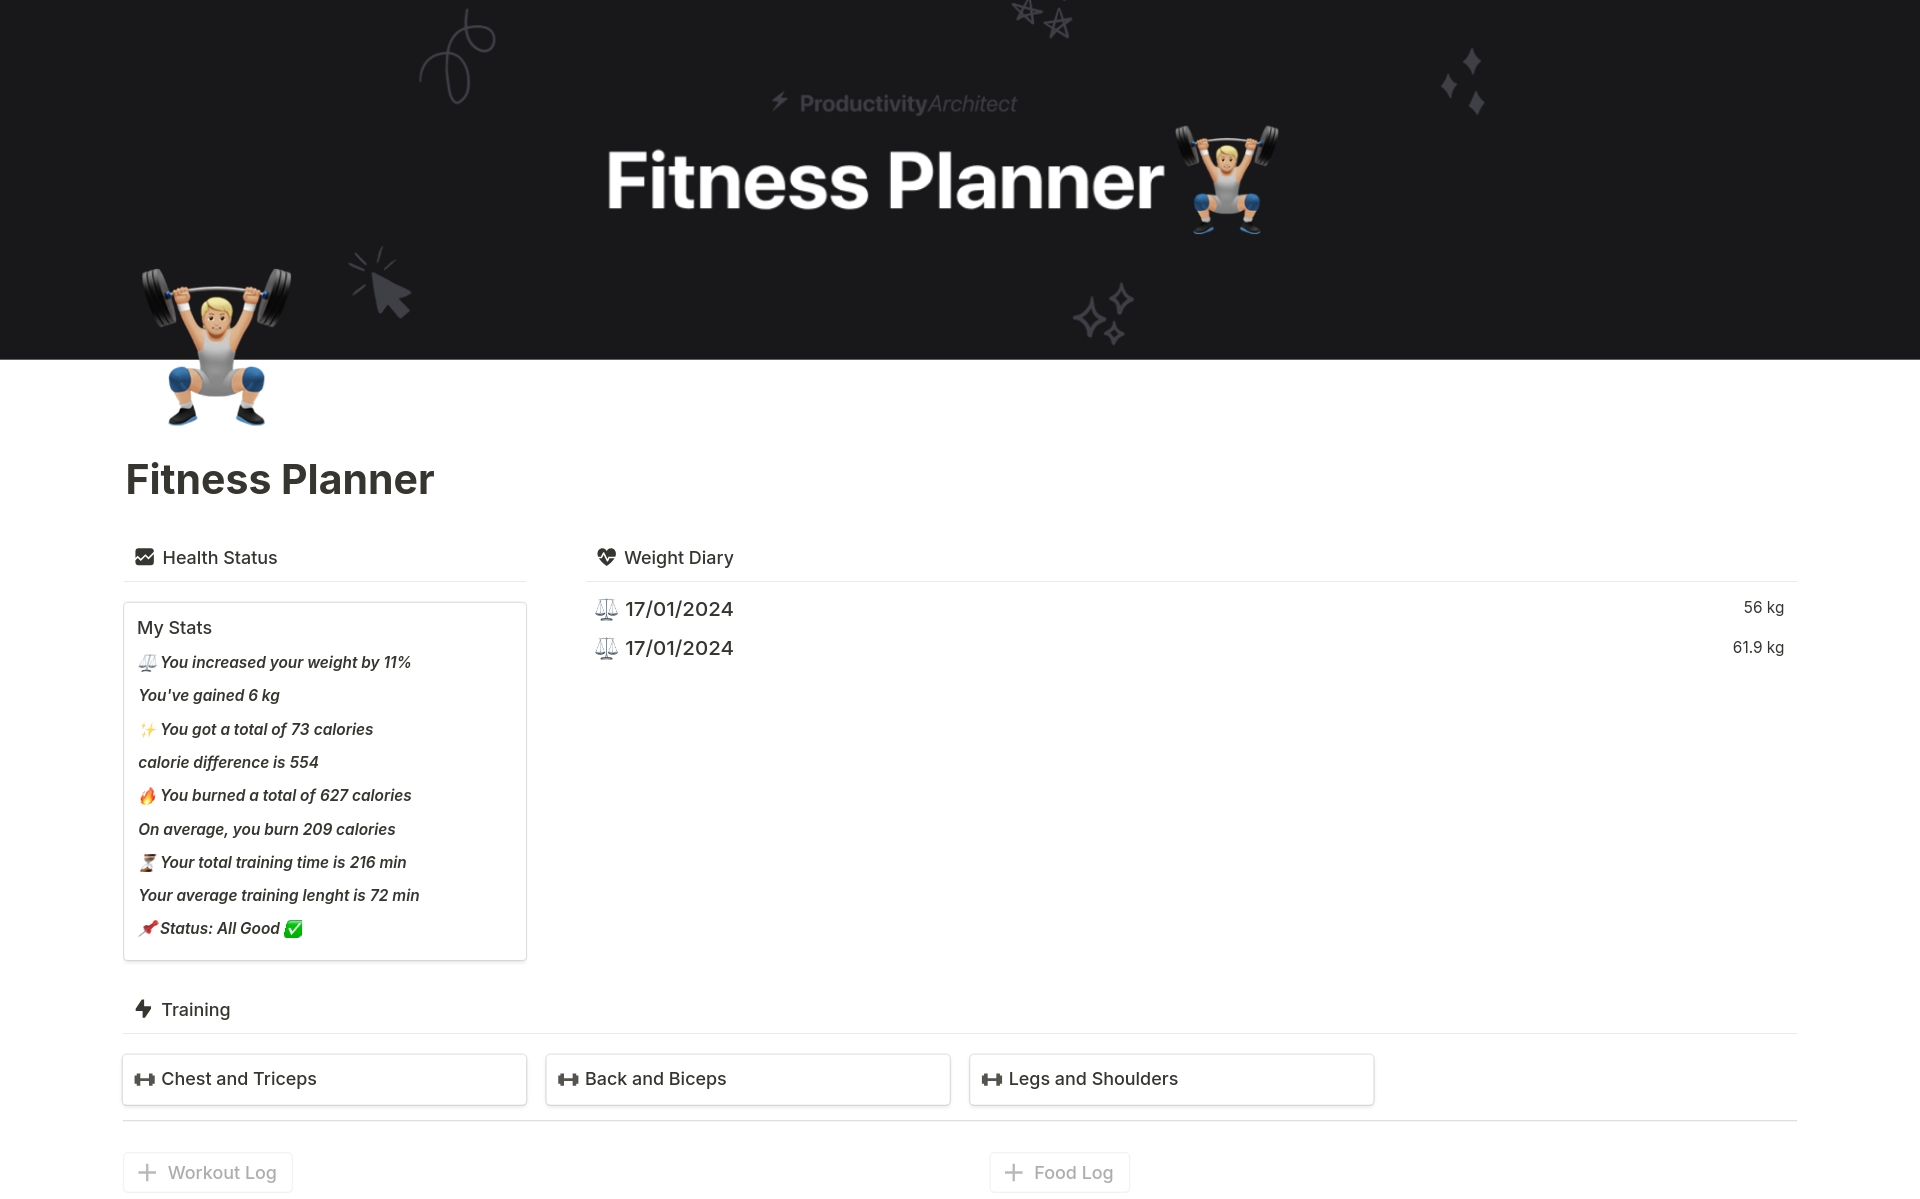 You'll get the most complete fitness dashboard.